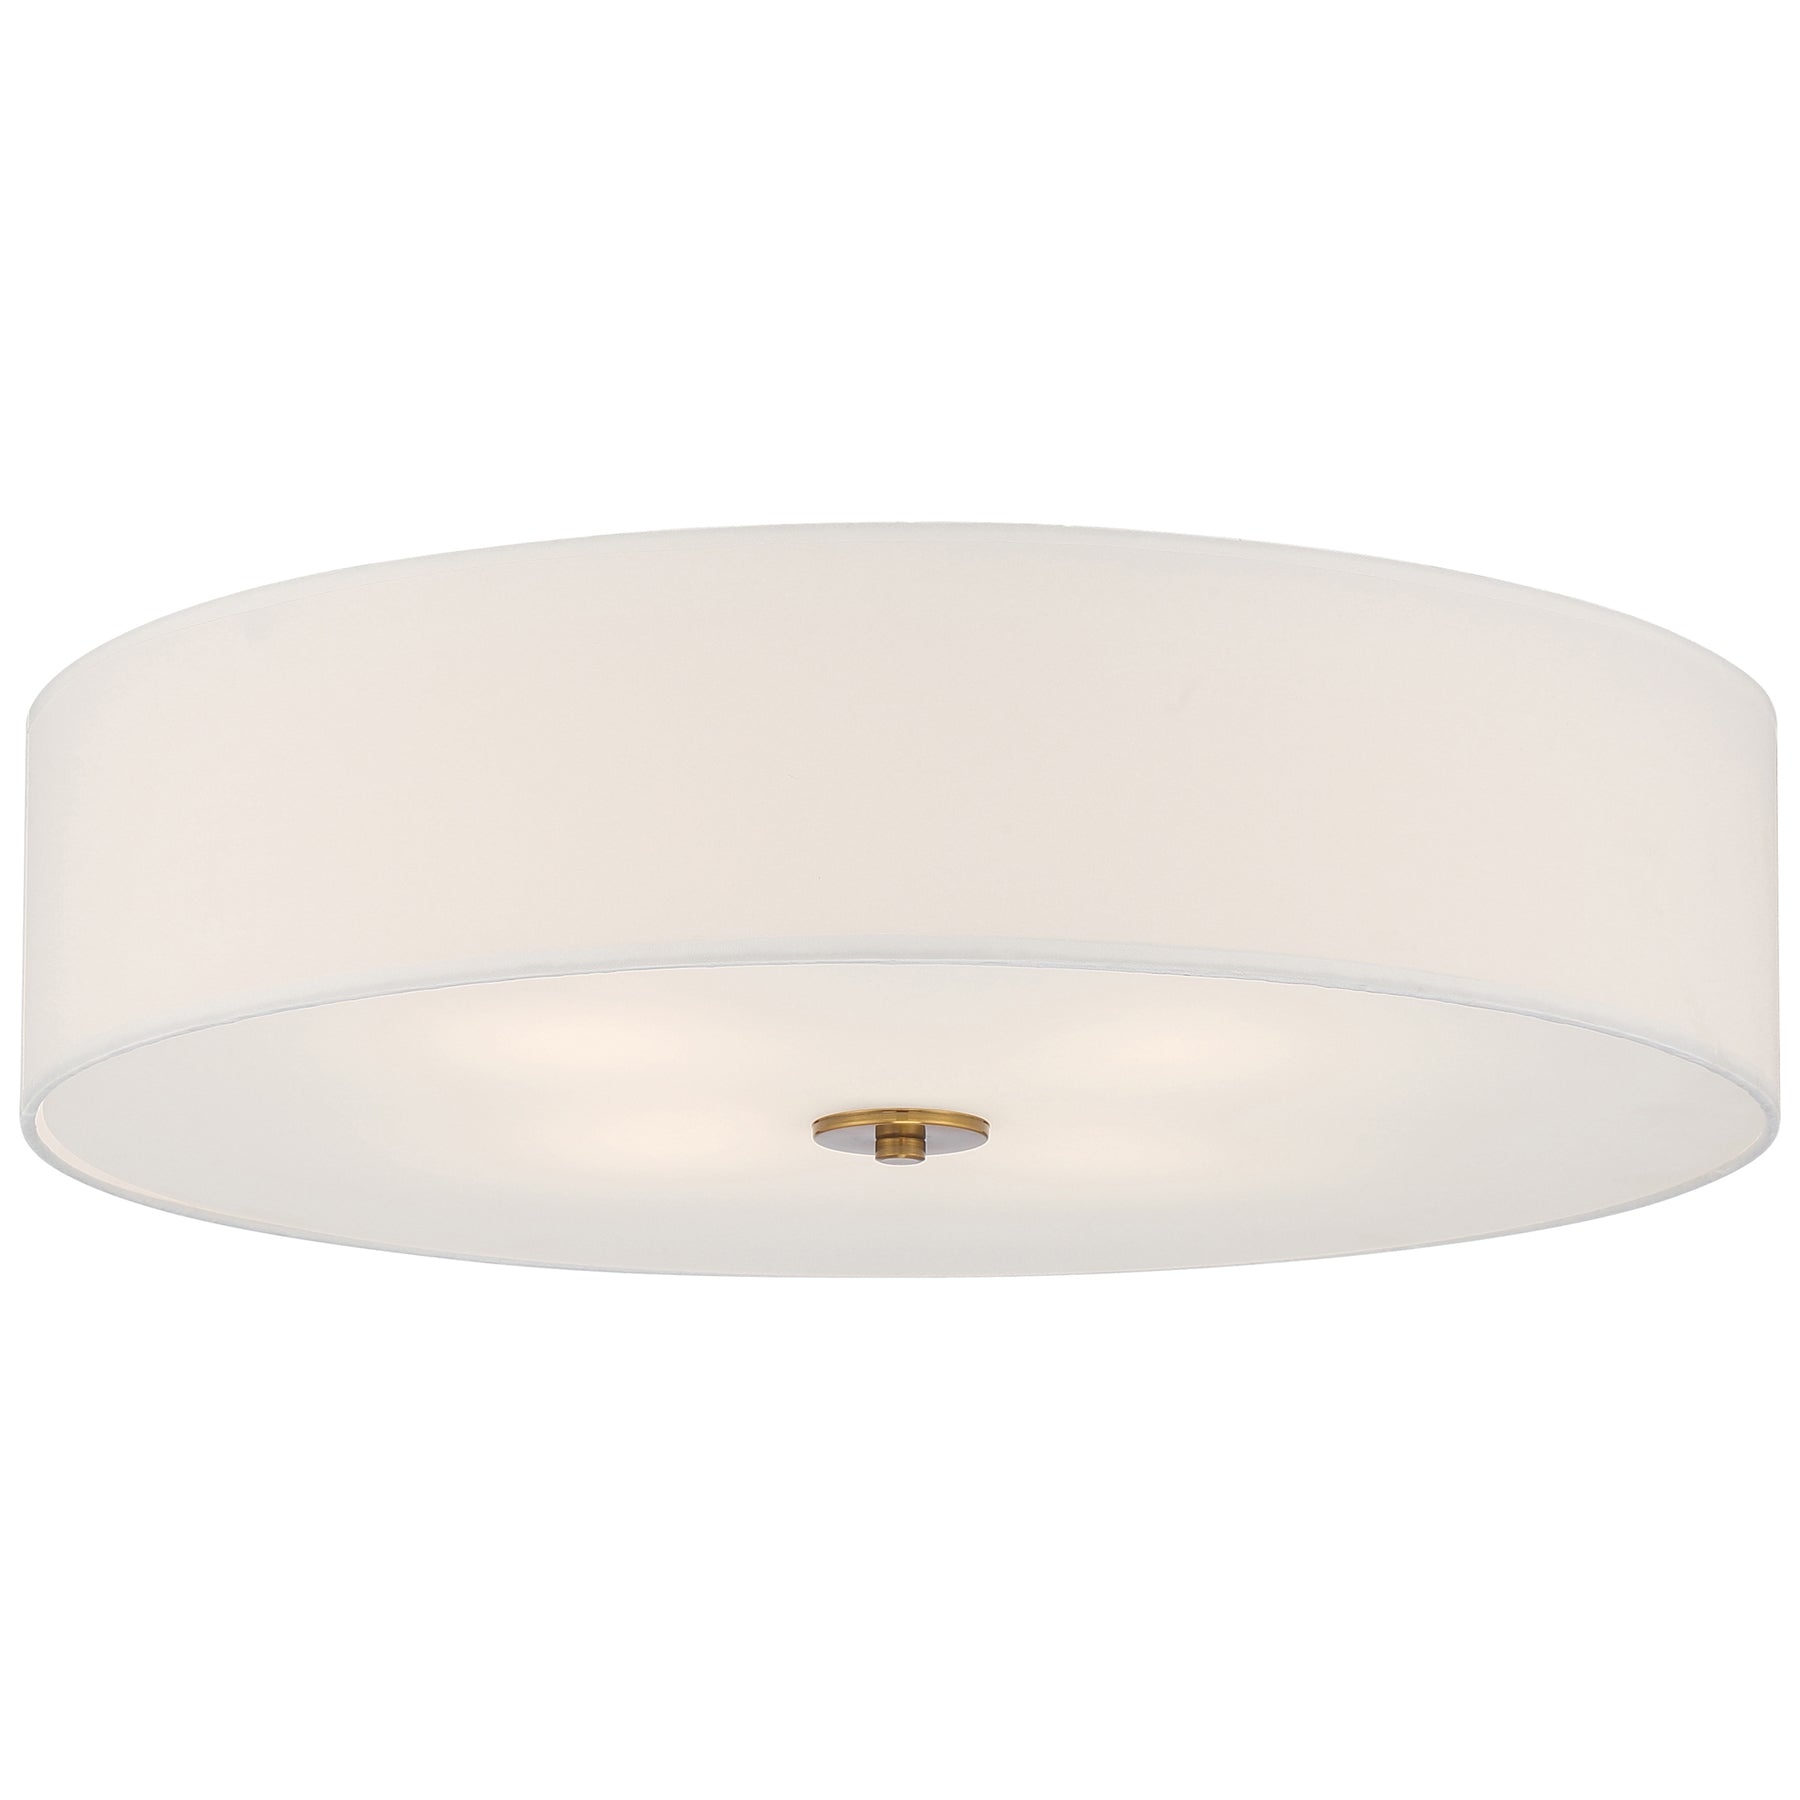 Mid Town 4 Light 24in. Flush Mount - Antique Brushed Brass